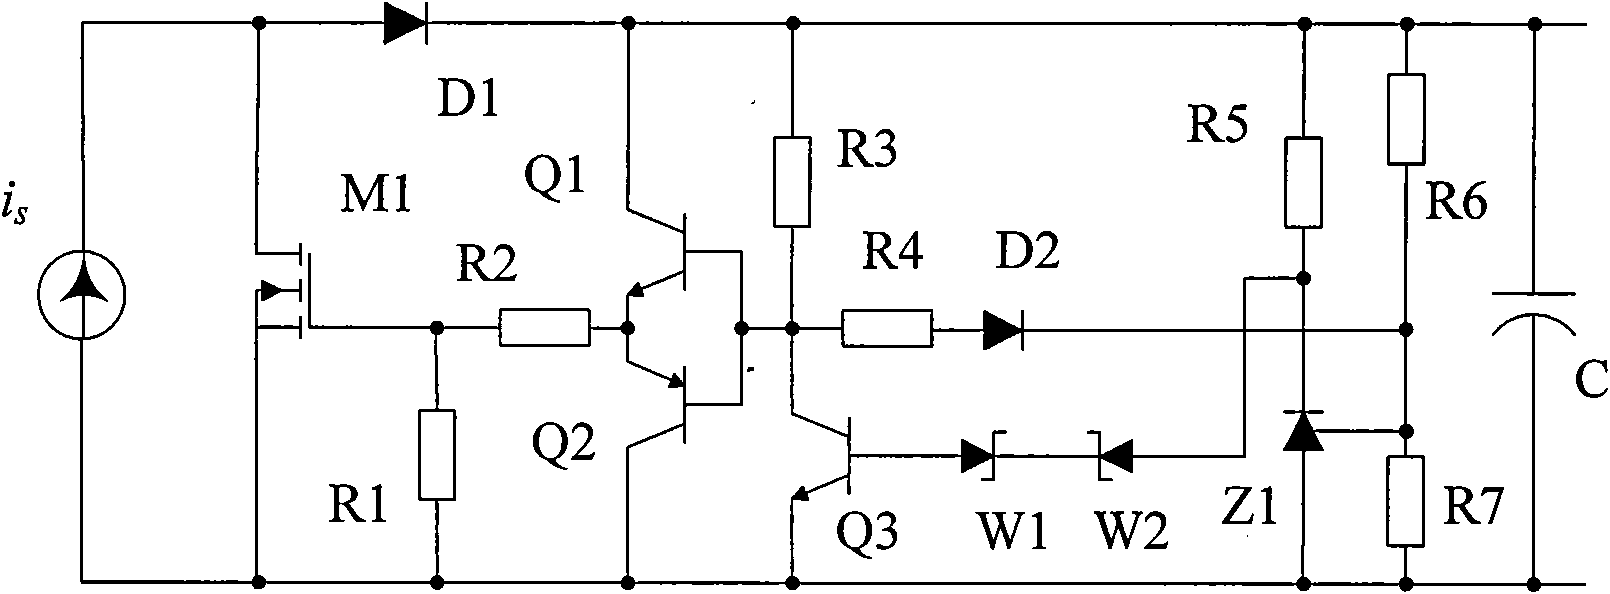 High voltage isolating switch power and a plurality of output isolated switch power systems